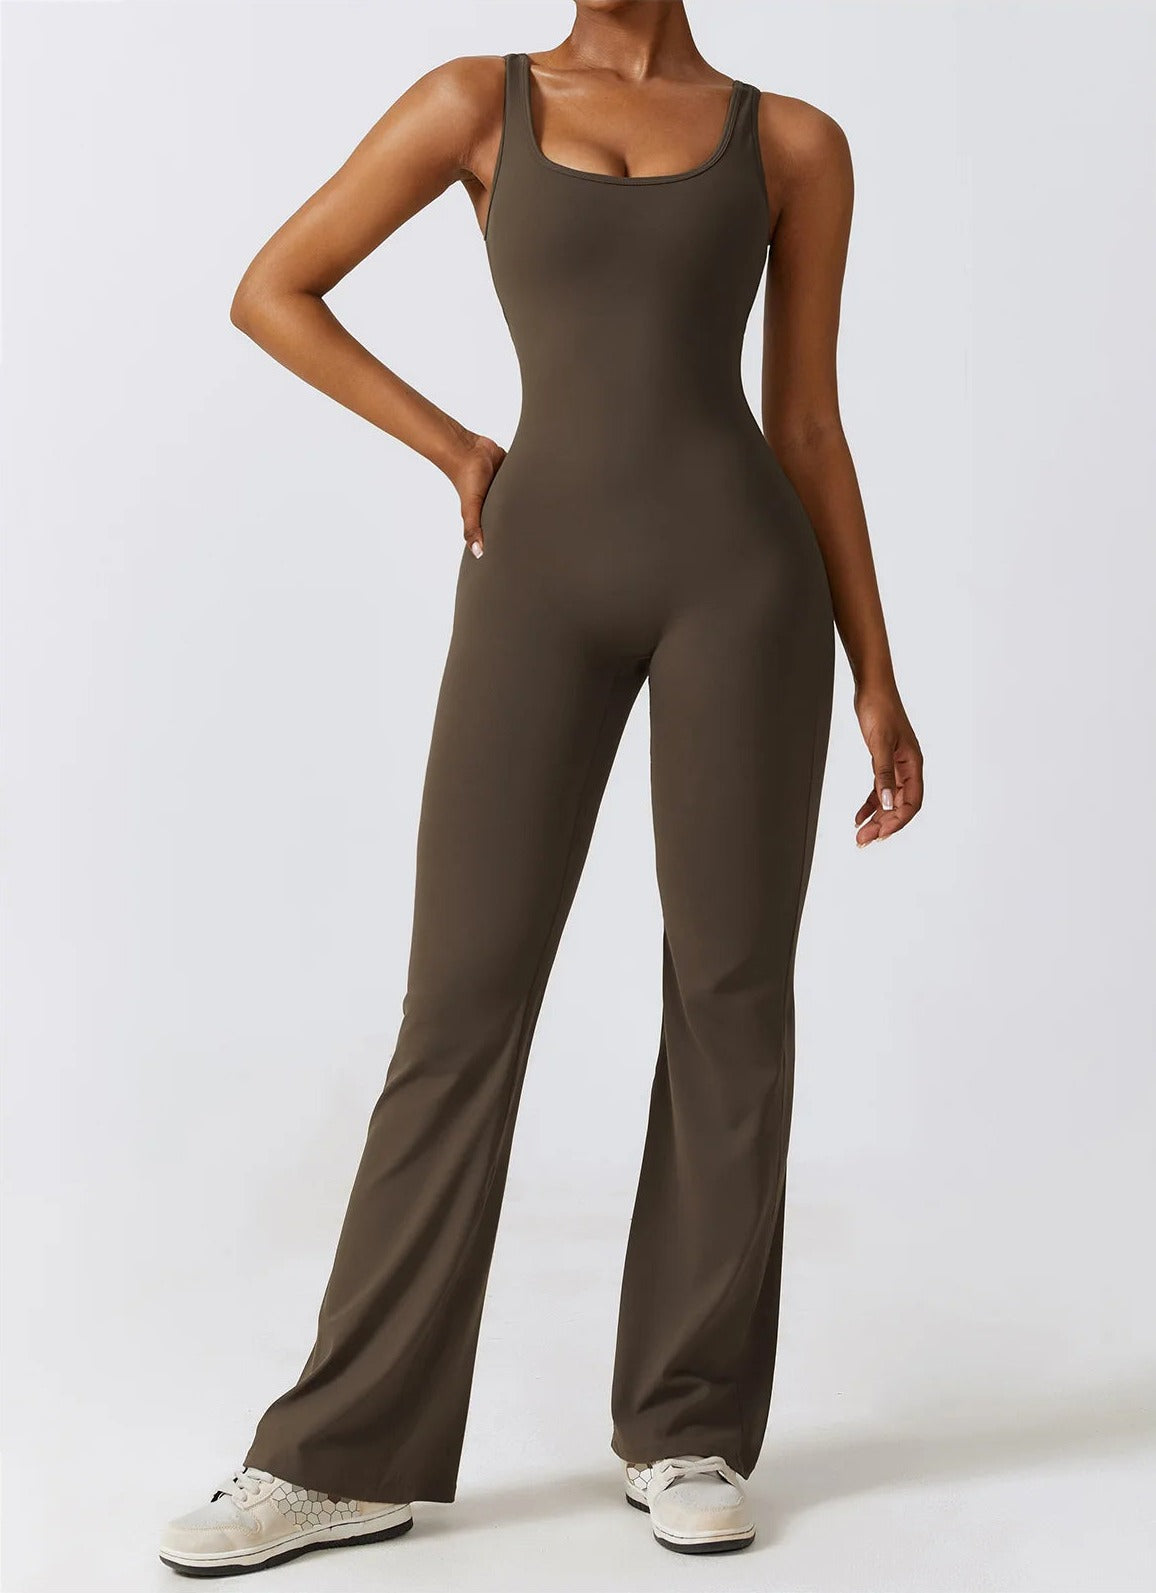 Replying to @The One 𝕰 The jumpsuit SNATCHES dyhm! Its from